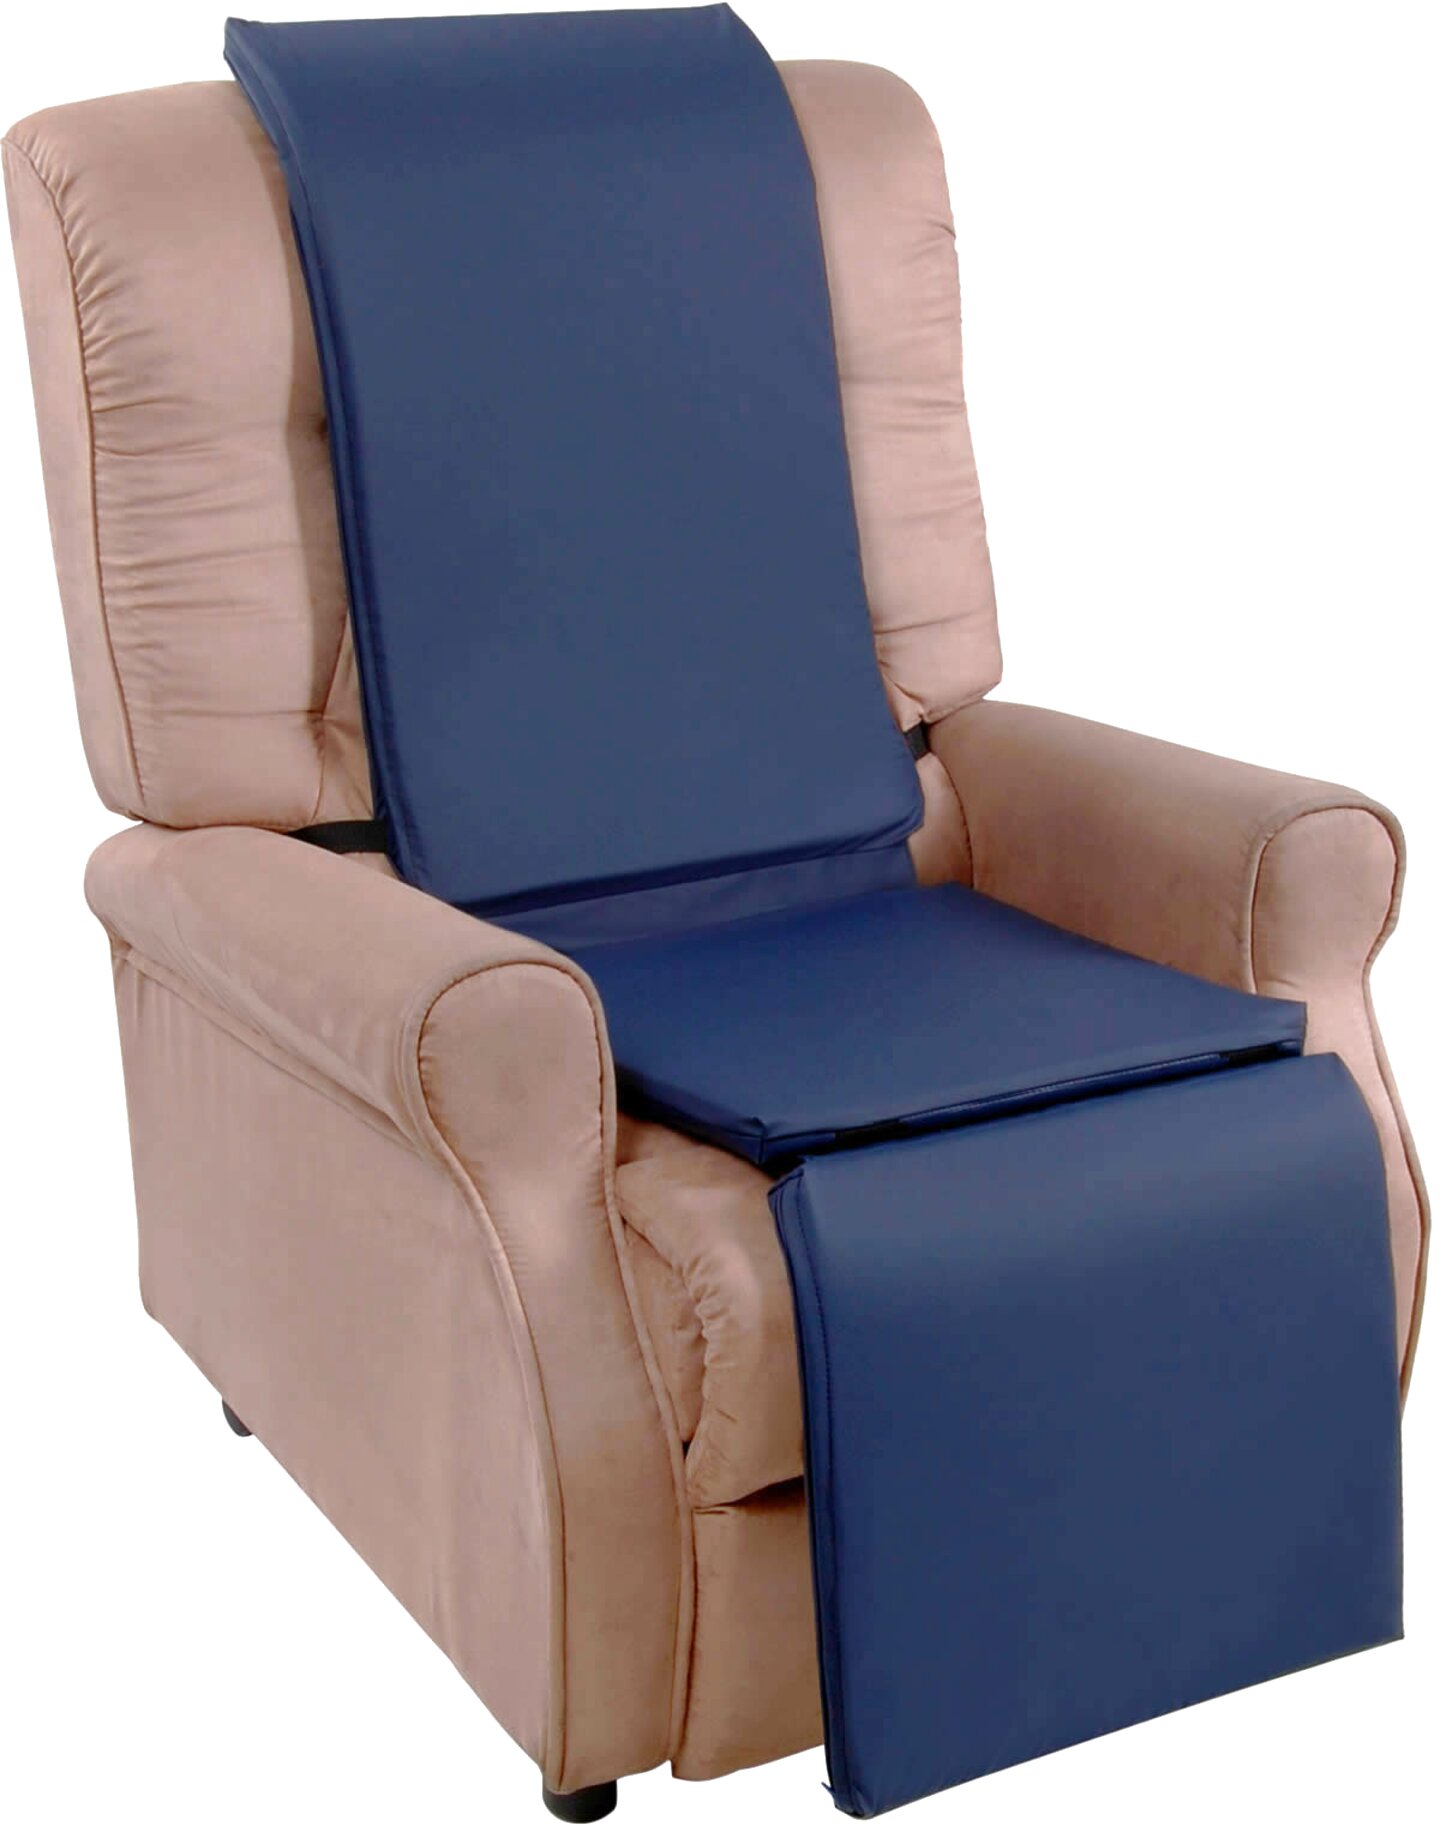 Recliner Chair Cushion for sale in UK | 99 used Recliner Chair Cushions